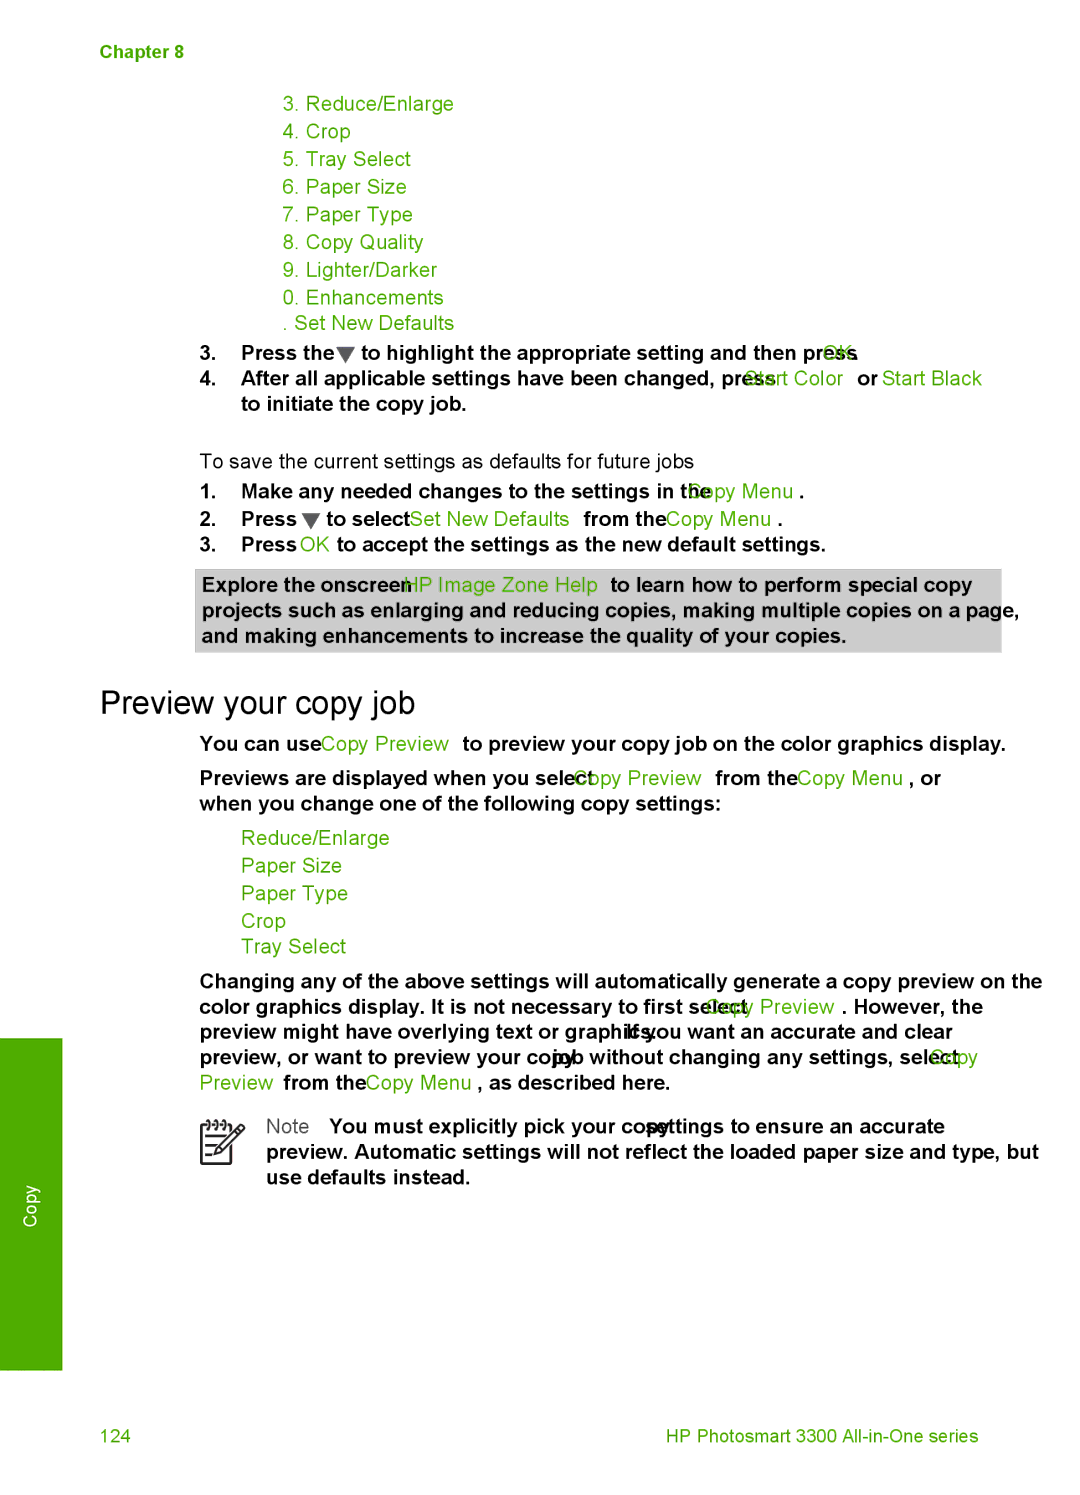 HP 3300 manual Preview your copy job, To save the current settings as defaults for future jobs 